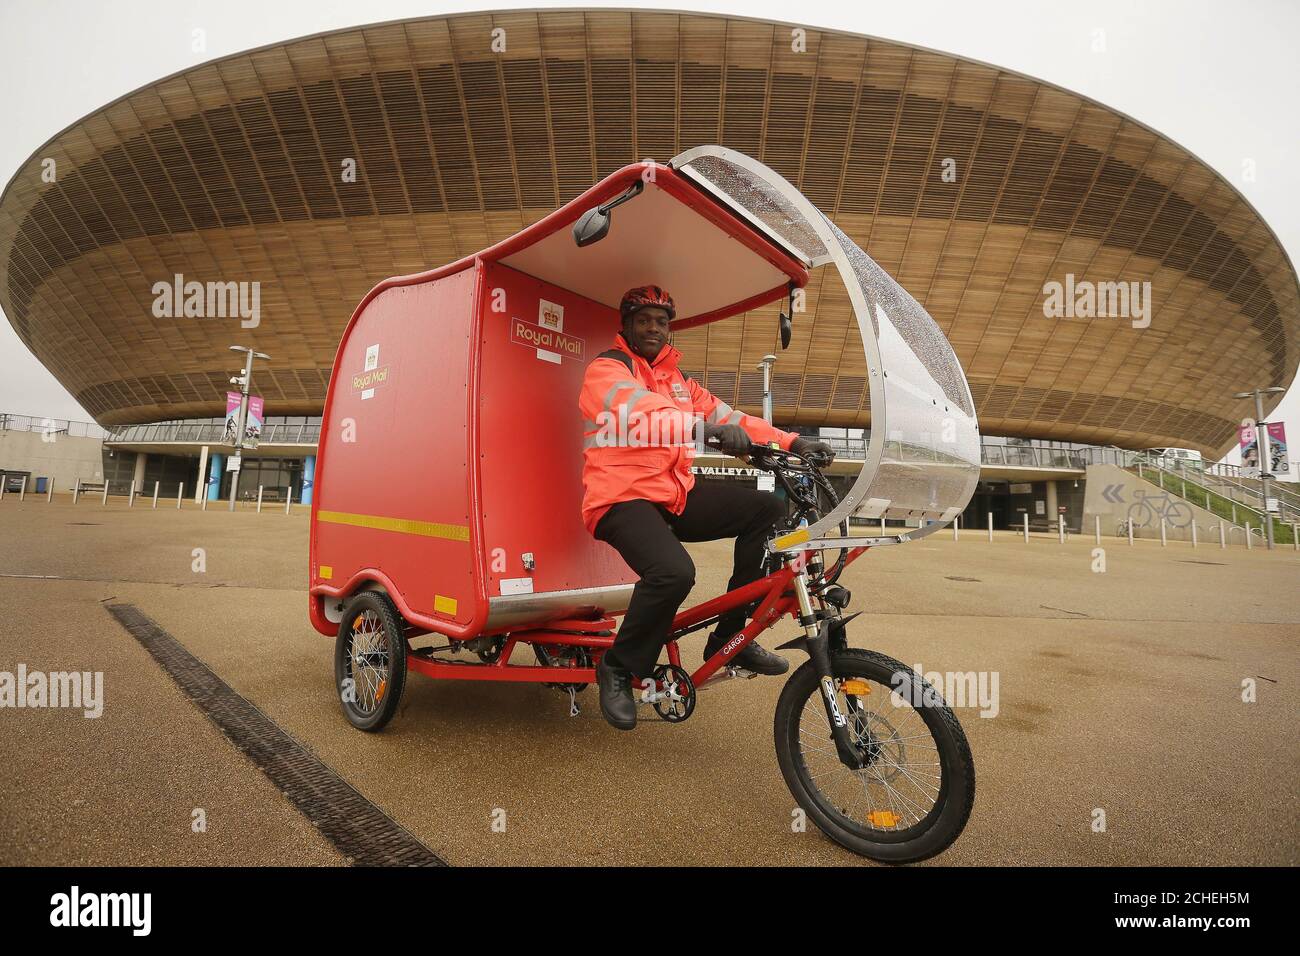 Postman Jude Stirling at the unveiling of the zero-carbon emission e-Trikes, which are predominantly powered by a combination of solar, battery and brake technology, and will be trialled by Royal Mail in Stratford in east London, Cambridge and Sutton Coldfield at the end of the month. Stock Photo